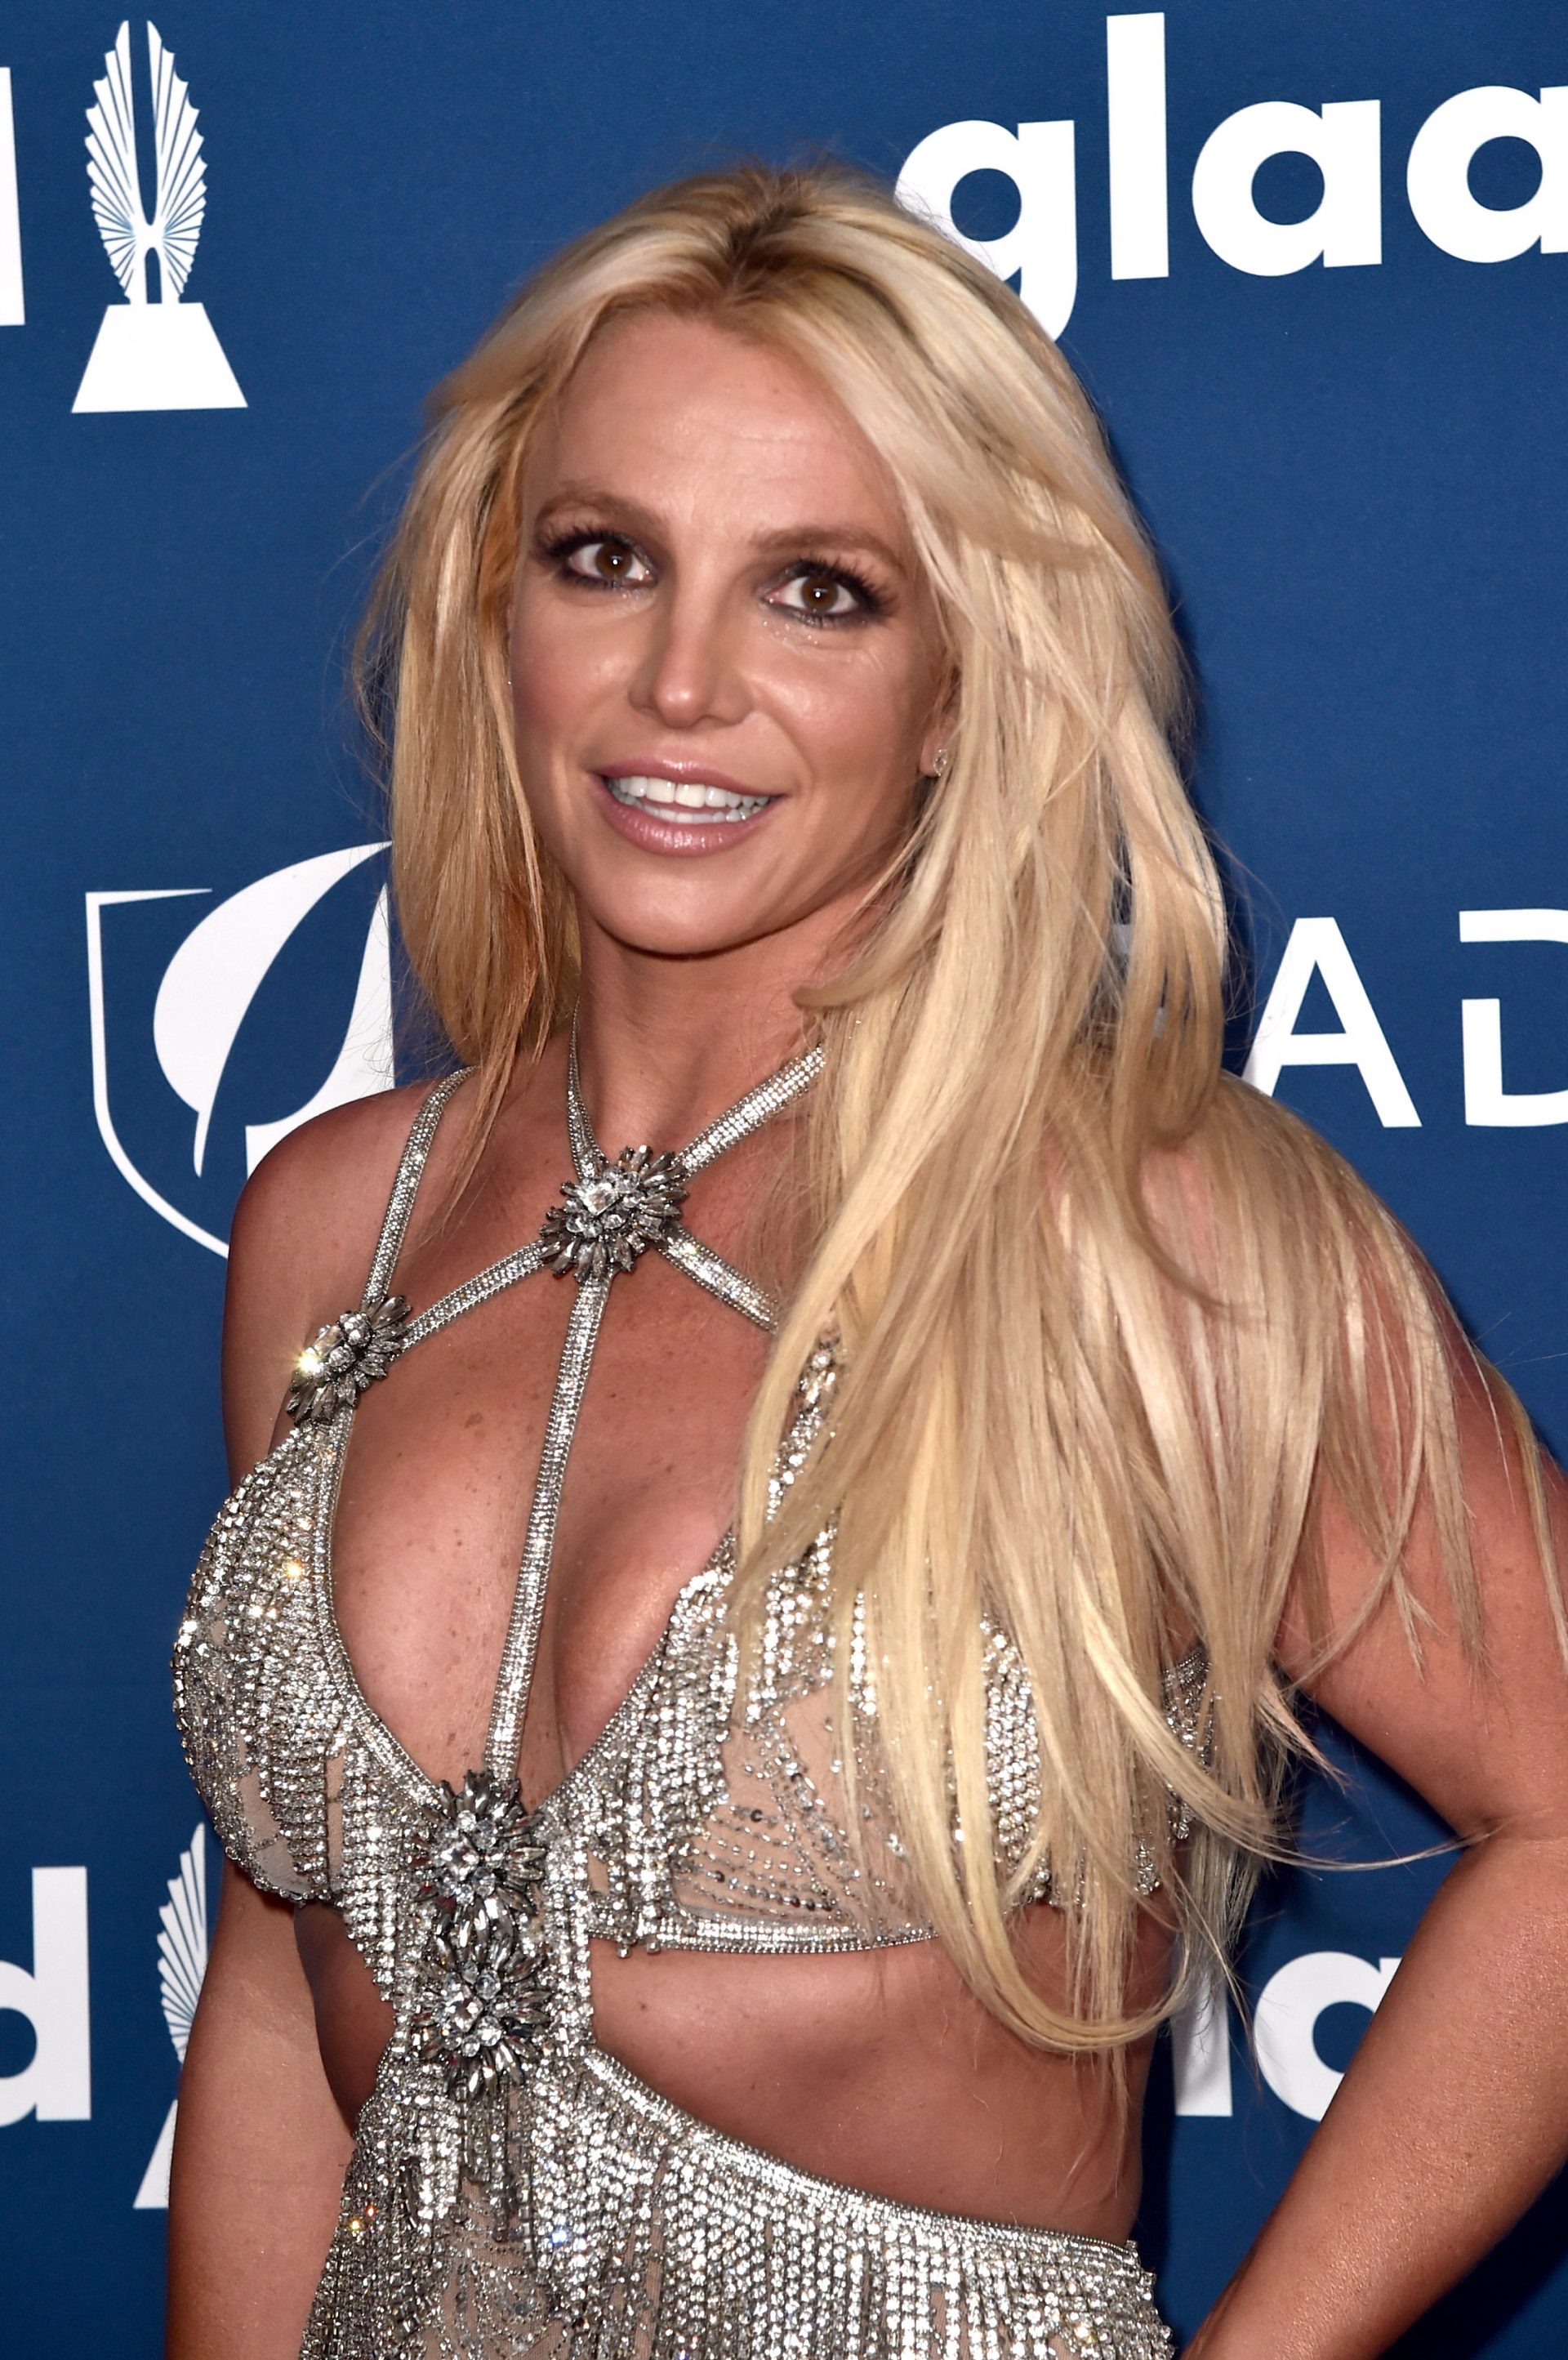 Britney Spears Apologizes “for Pretending Adore I’ve Been OK”